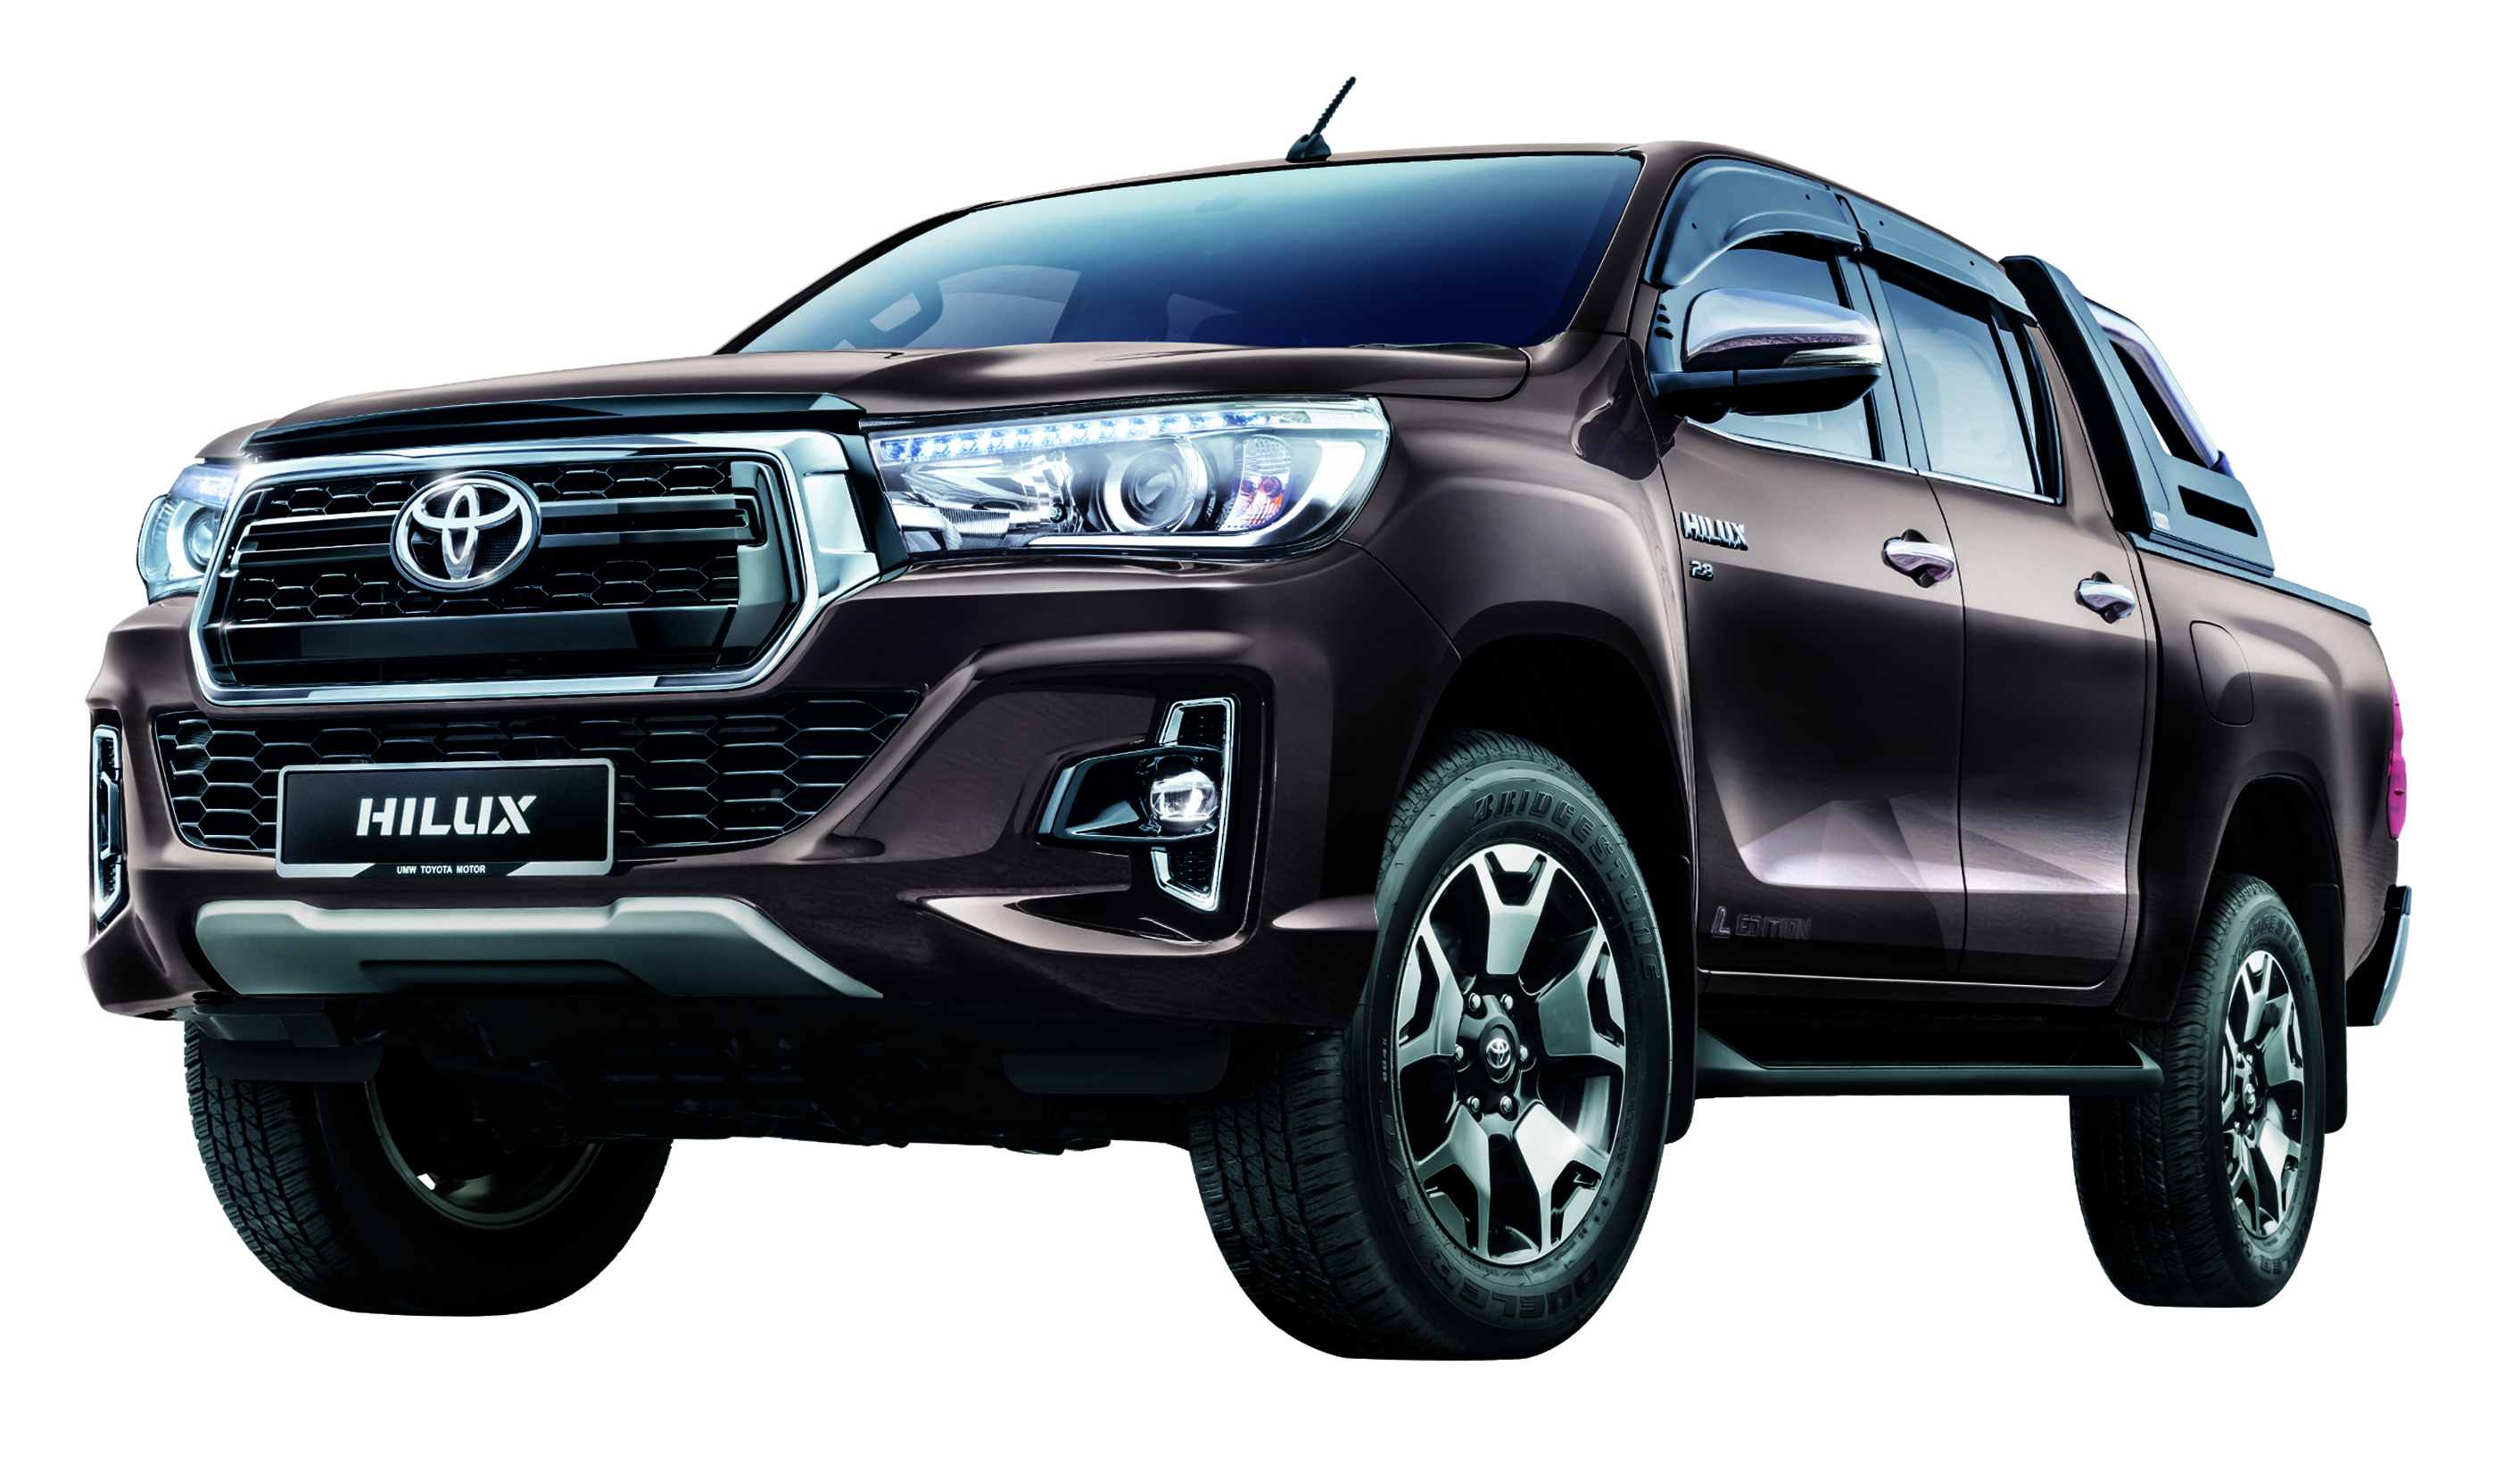 Umw Toyota Introduces Upgraded Fortuner Hilux Innova Plus A New Colour Option News And Reviews On Malaysian Cars Motorcycles And Automotive Lifestyle